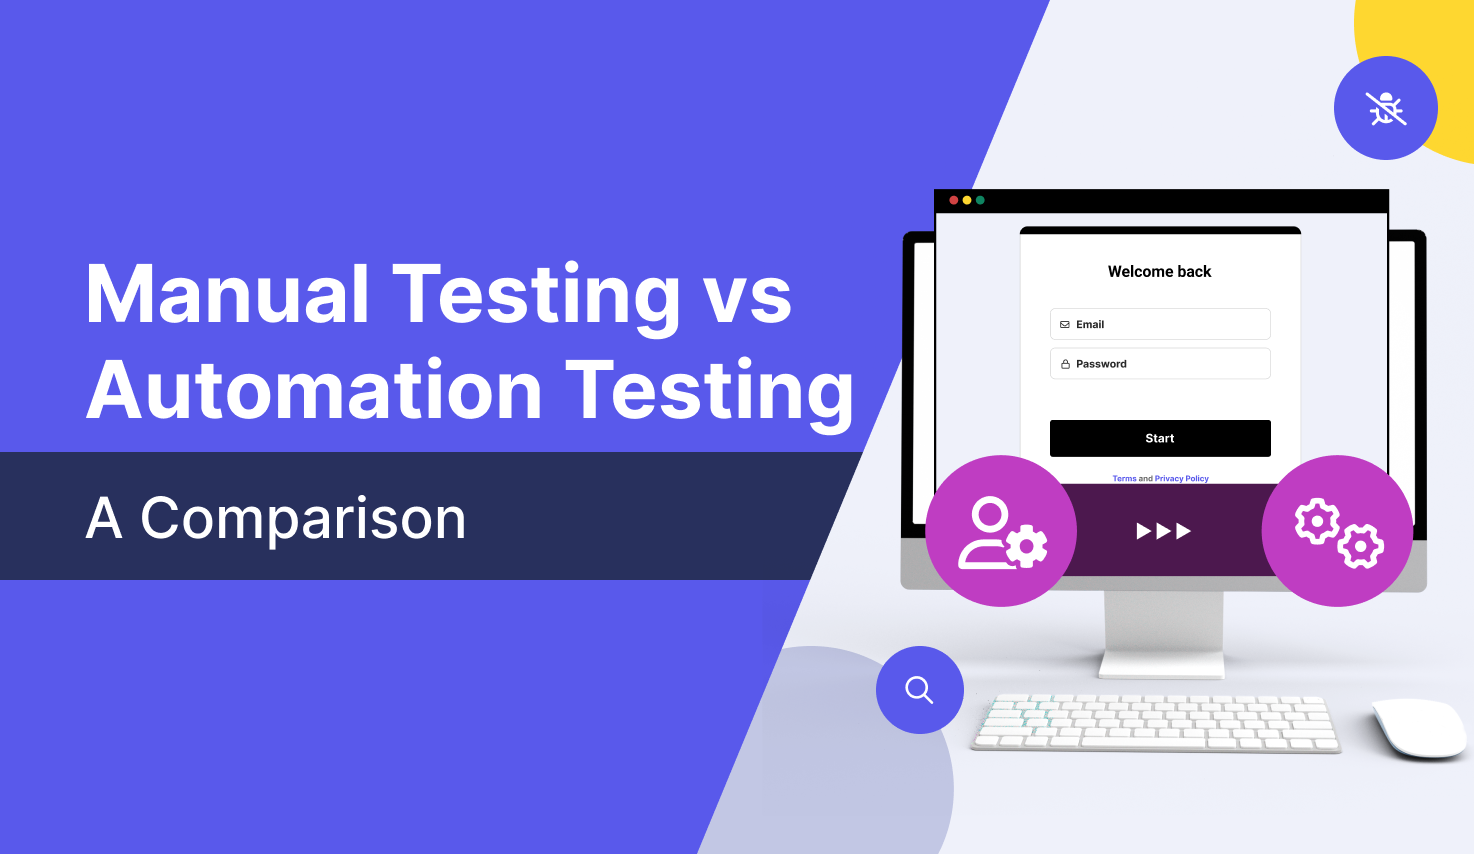 How to switch from manual testing to automation testing